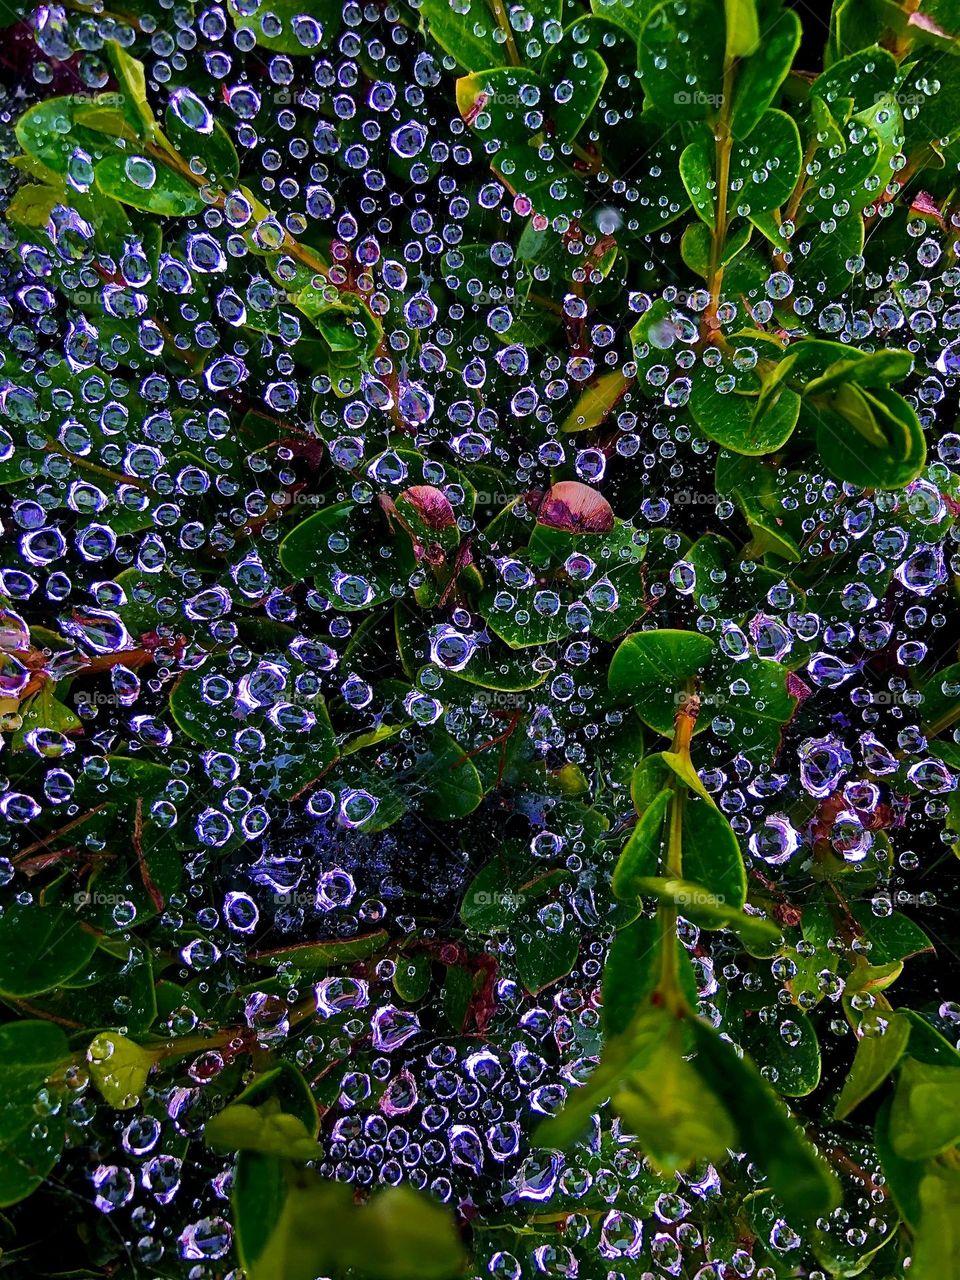 Raindrops on spiderwebs on shrubbery 